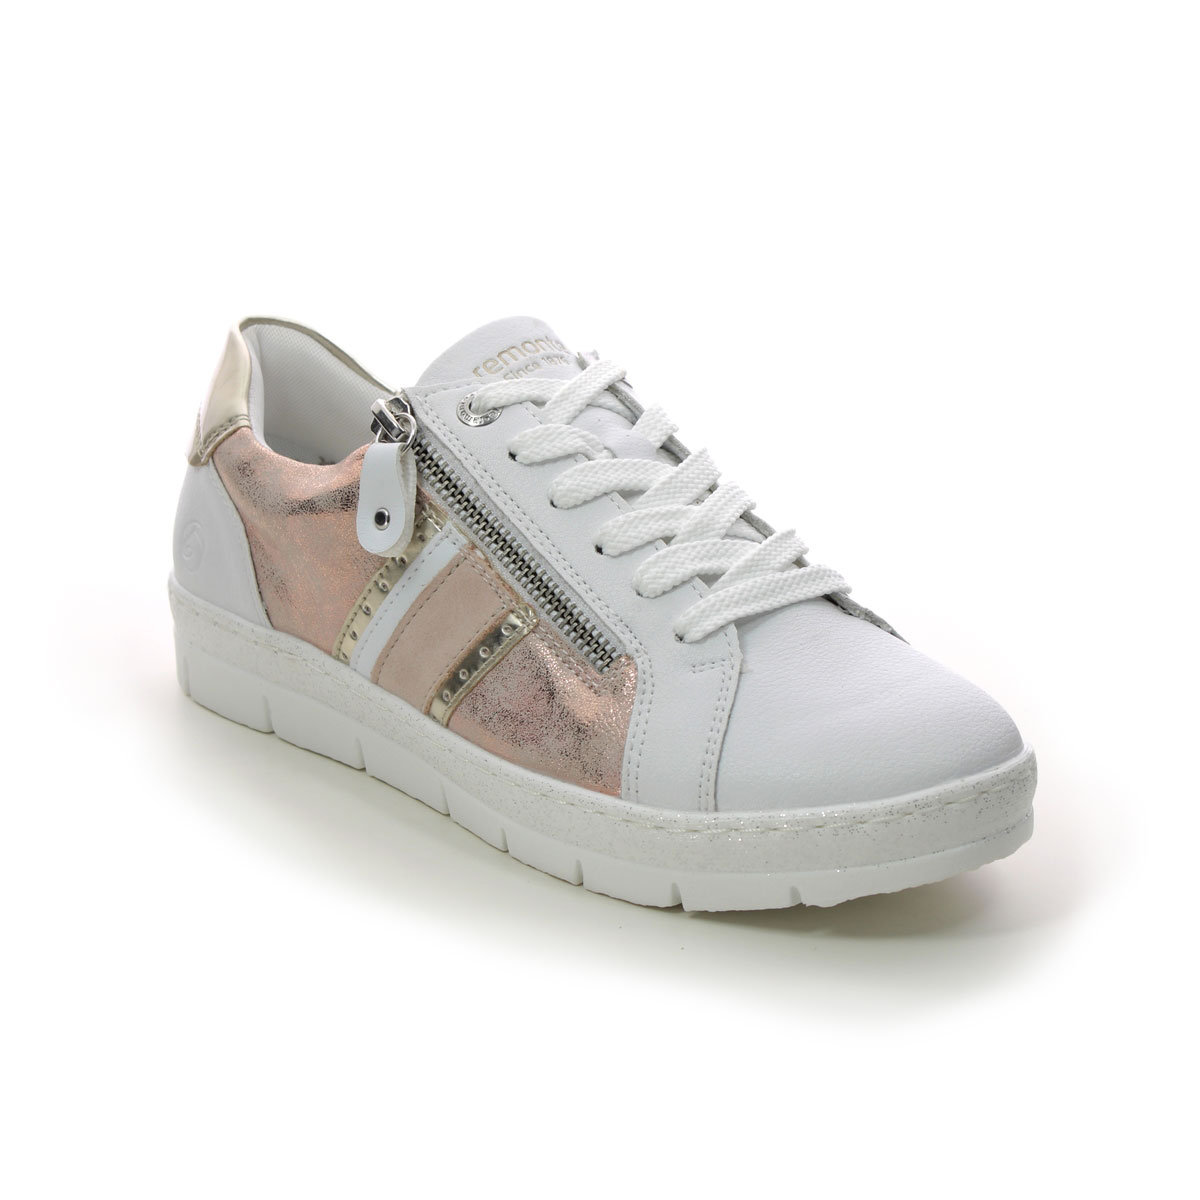 Remonte Ravenna 11 White Rose Gold Womens Trainers D5827-90 In Size 37 In Plain White Rose Gold